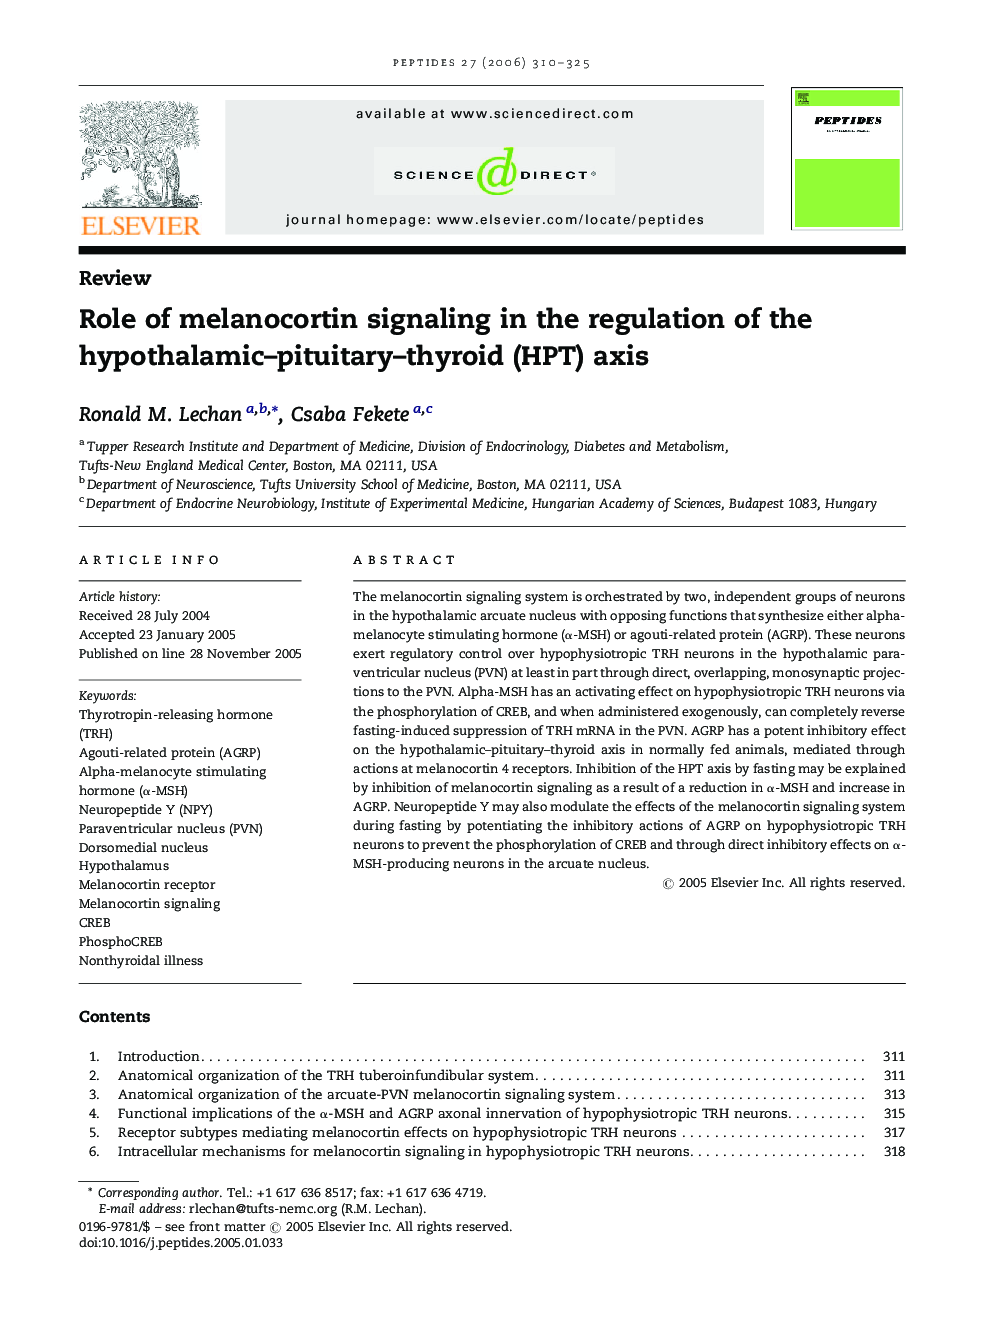 Role of melanocortin signaling in the regulation of the hypothalamic–pituitary–thyroid (HPT) axis